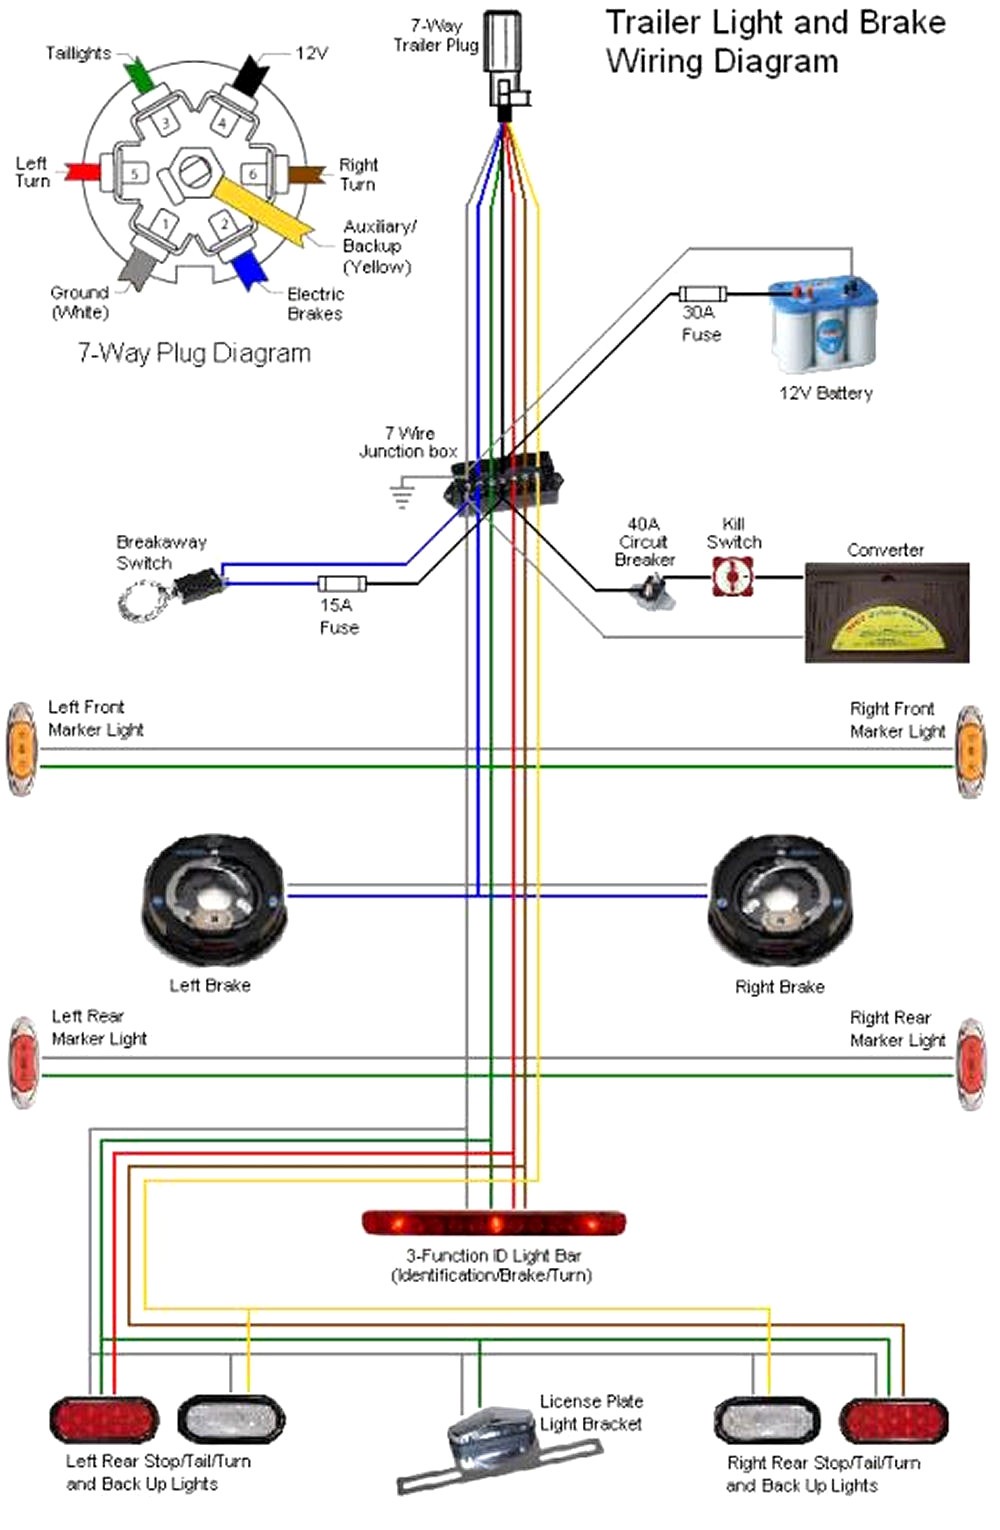 7 Prong Trailer Wiring Diagram Best 6 Pin Trailer Plug Wiring Diagram Fitfathers Me Lovely